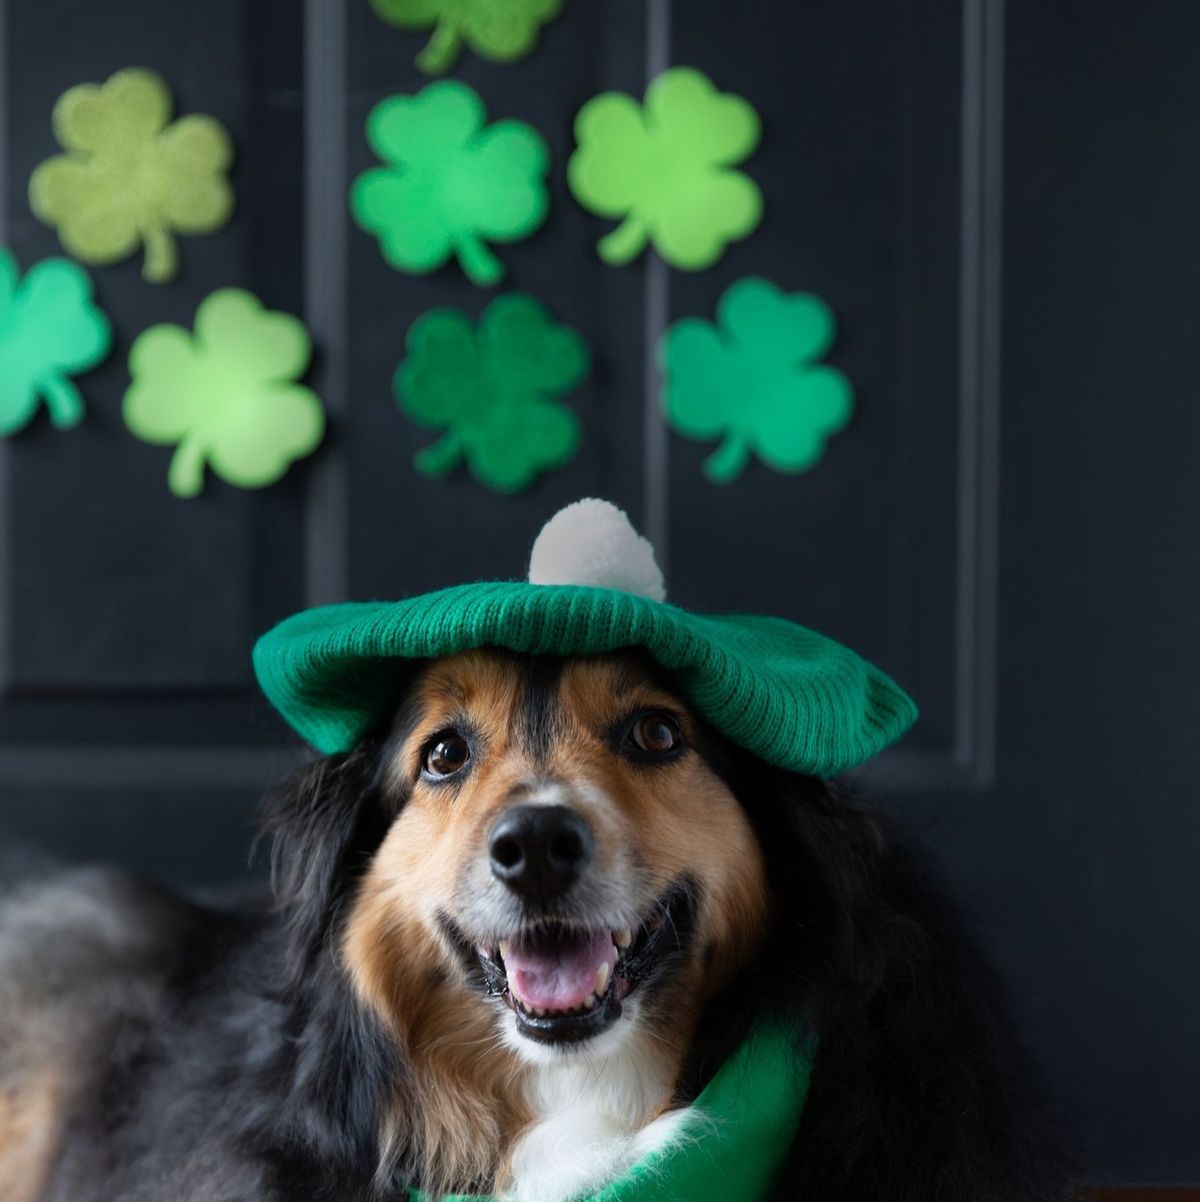 89 Best St. Patrick's Day Instagram Captions for 2024